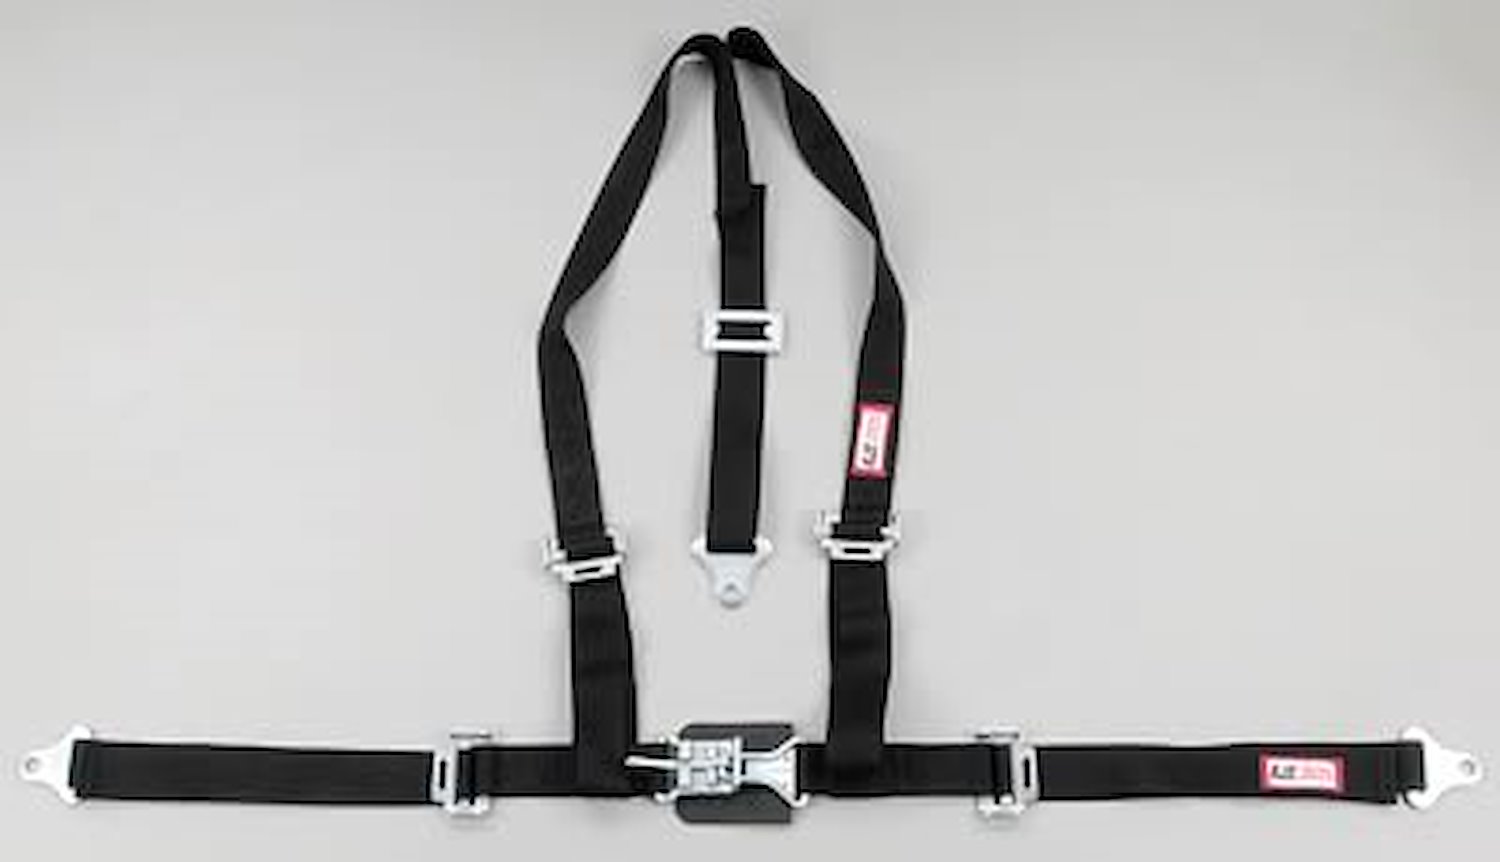 NON-SFI L&L HARNESS 3 PULL UP Lap Belt SEWN IN 2 Shoulder Harness V ROLL BAR Mount w/STERNUM STRAP ALL SNAP ENDS BLUE